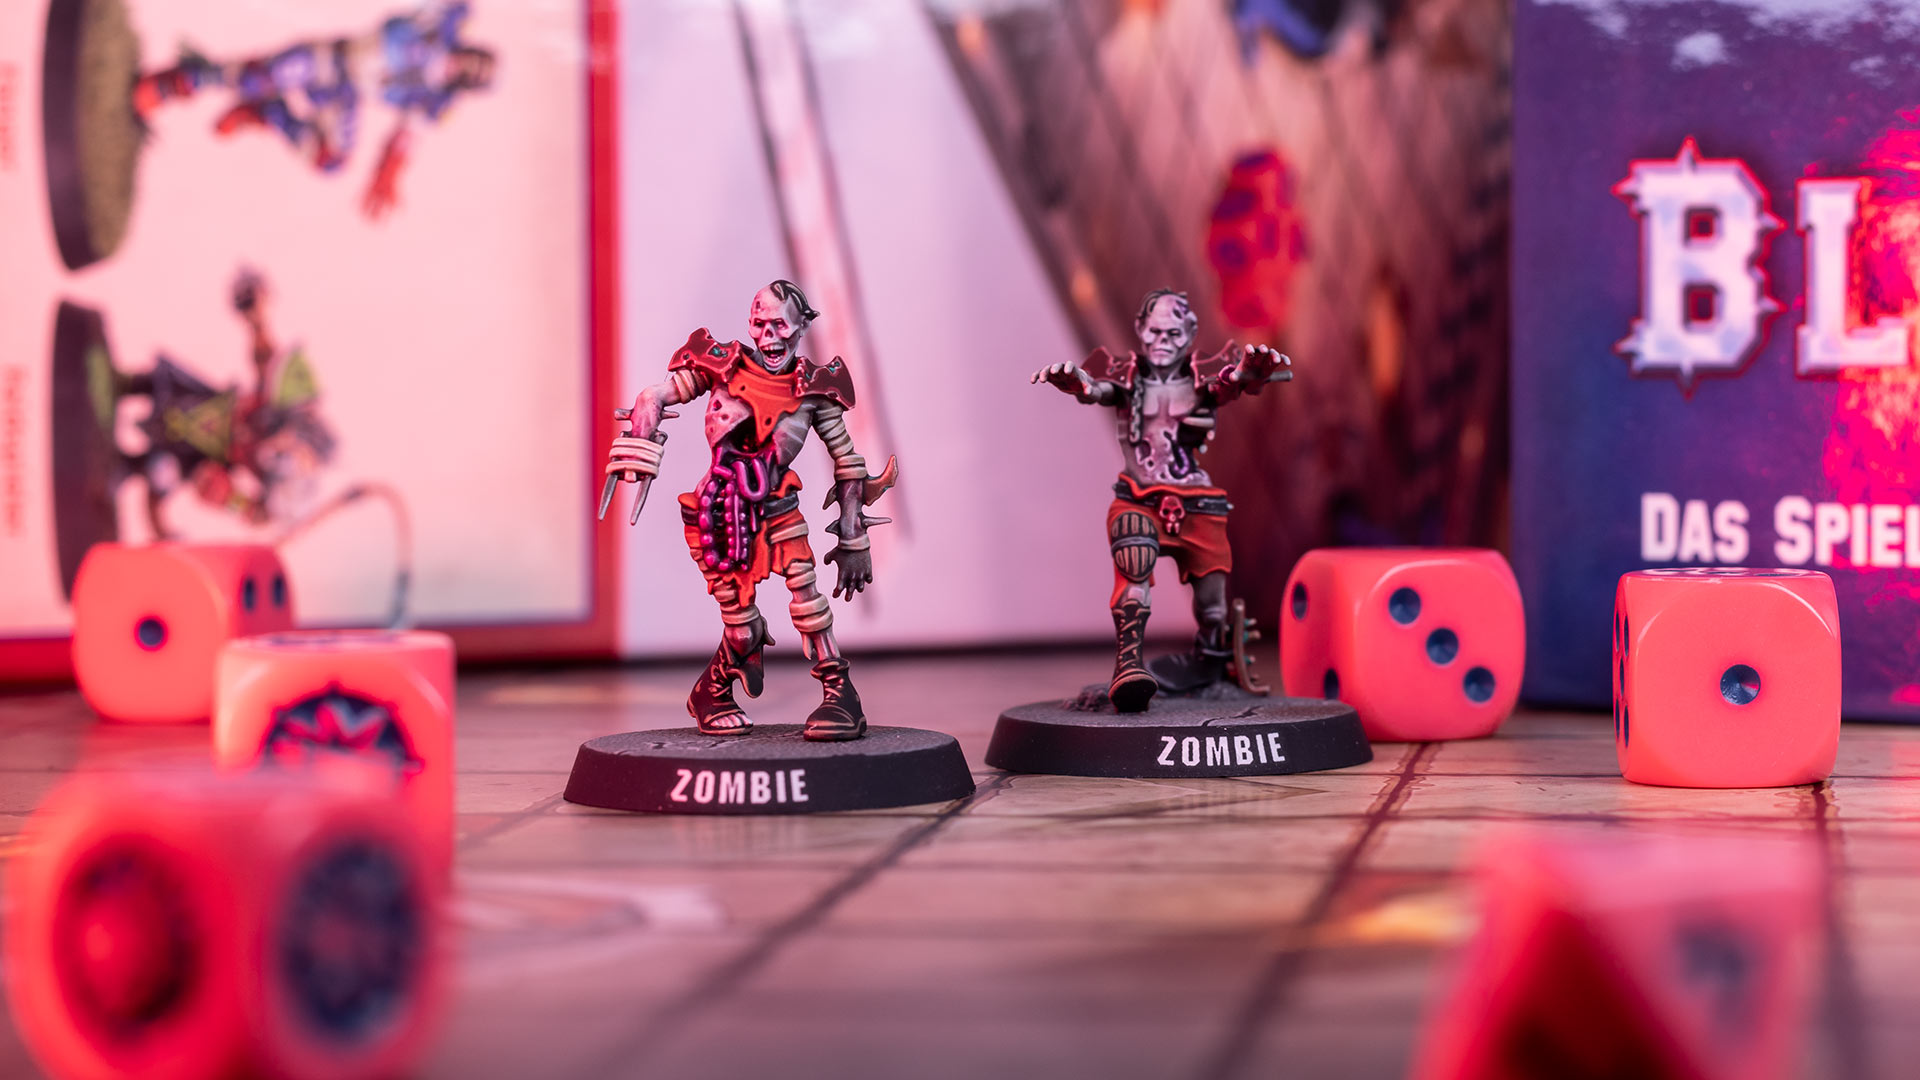 Cinematic shot of two Blood Bowl Zombie players and dice on a gaming board 